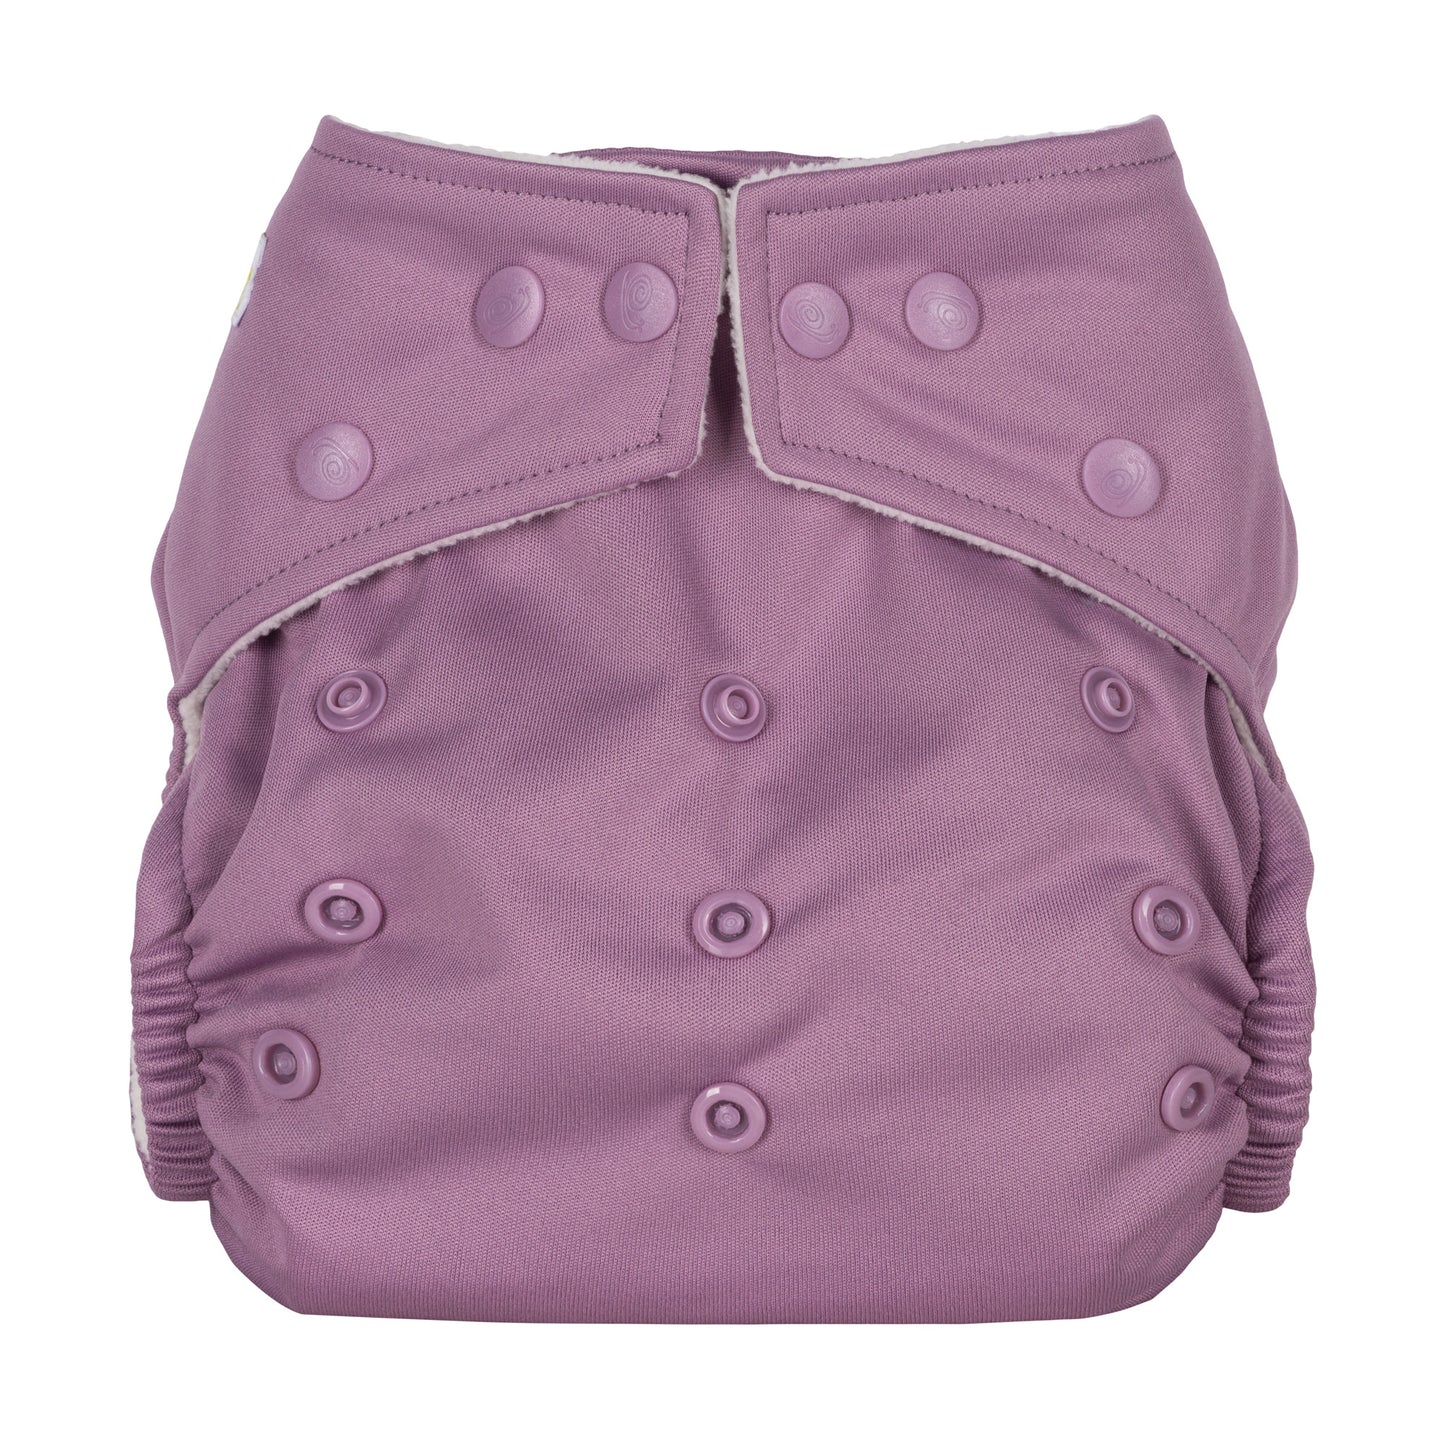 Wisteria reusable cloth nappy with poppers around the waist and rise snaps across the front.